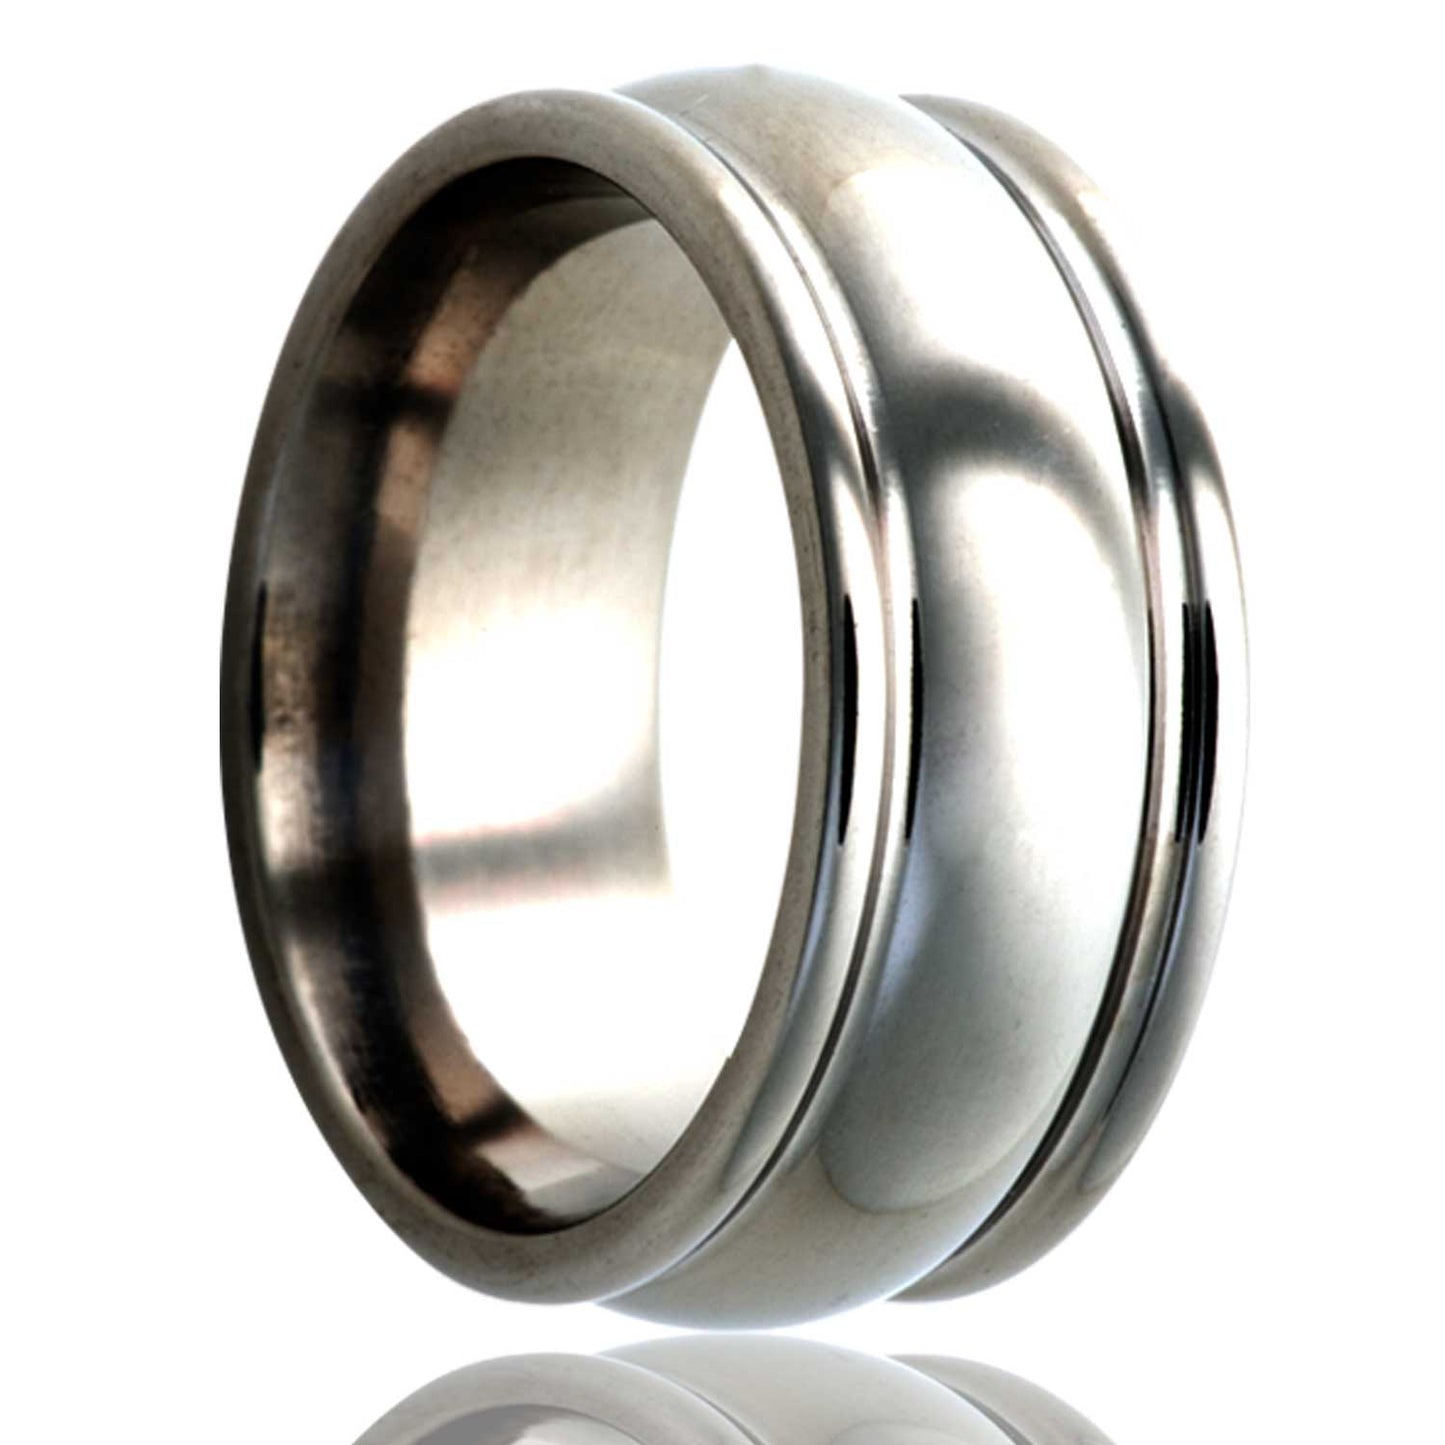 A titanium wedding band with raised center displayed on a neutral white background.